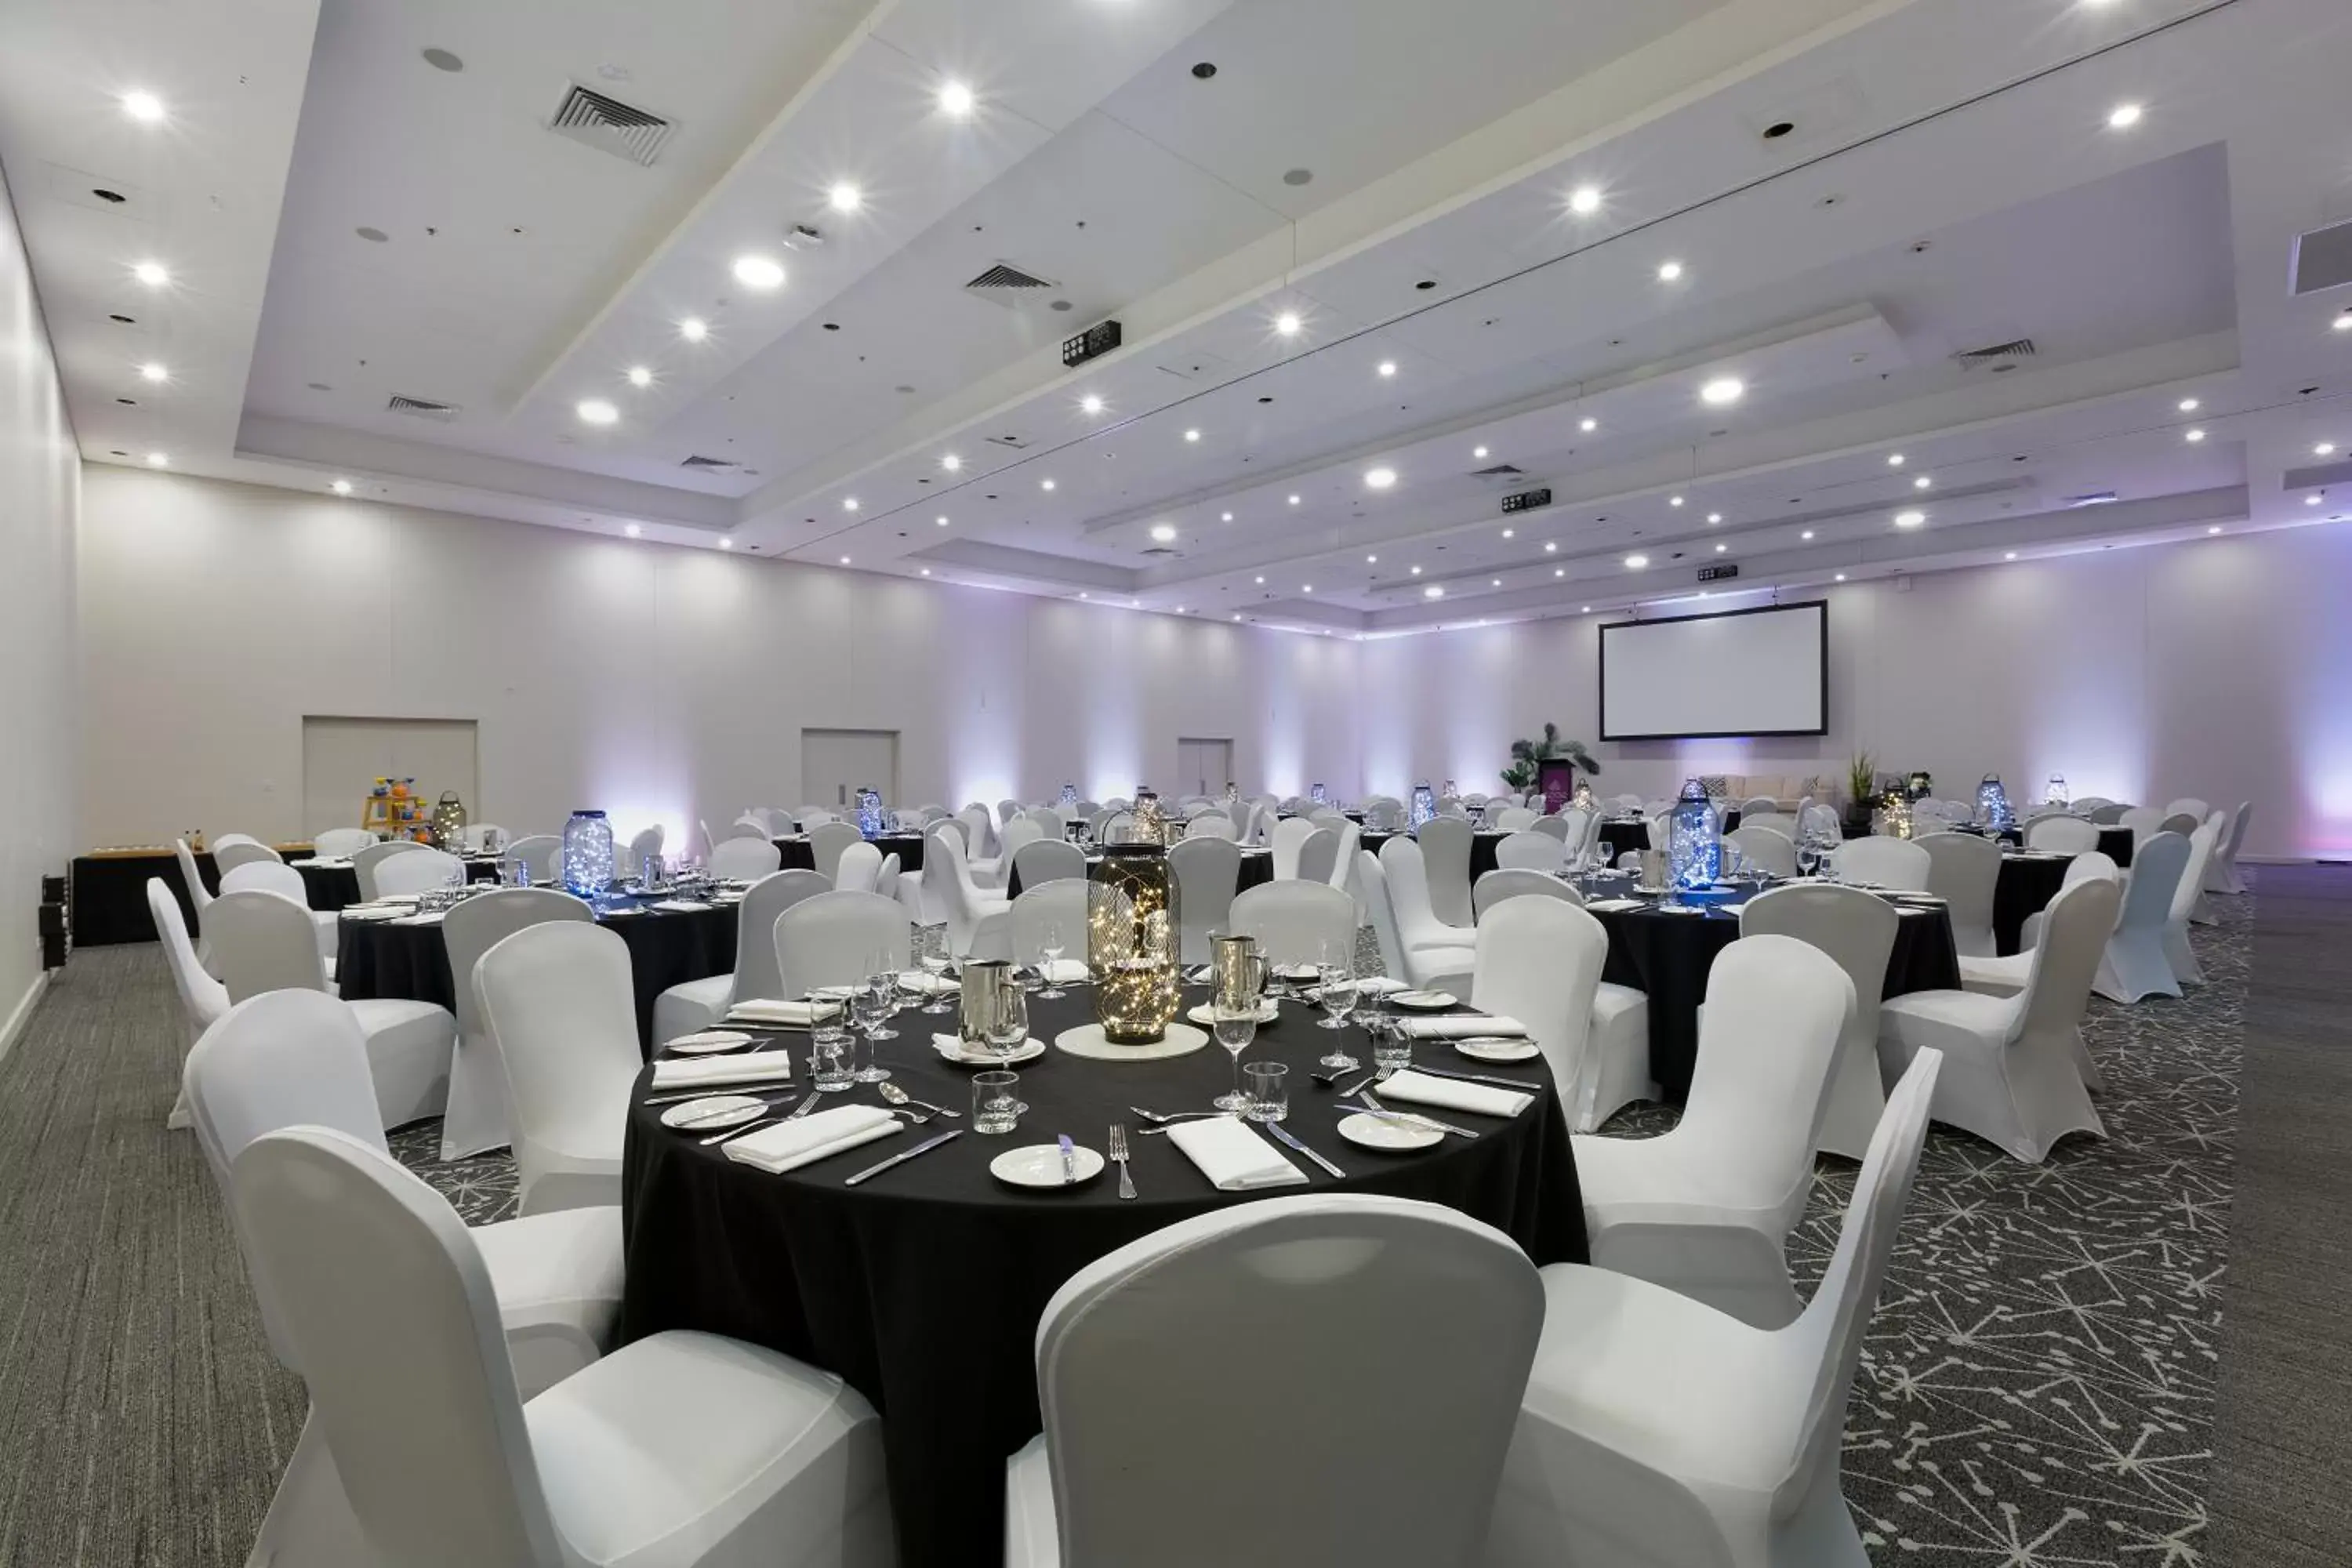 Meeting/conference room, Banquet Facilities in Sage Hotel Wollongong